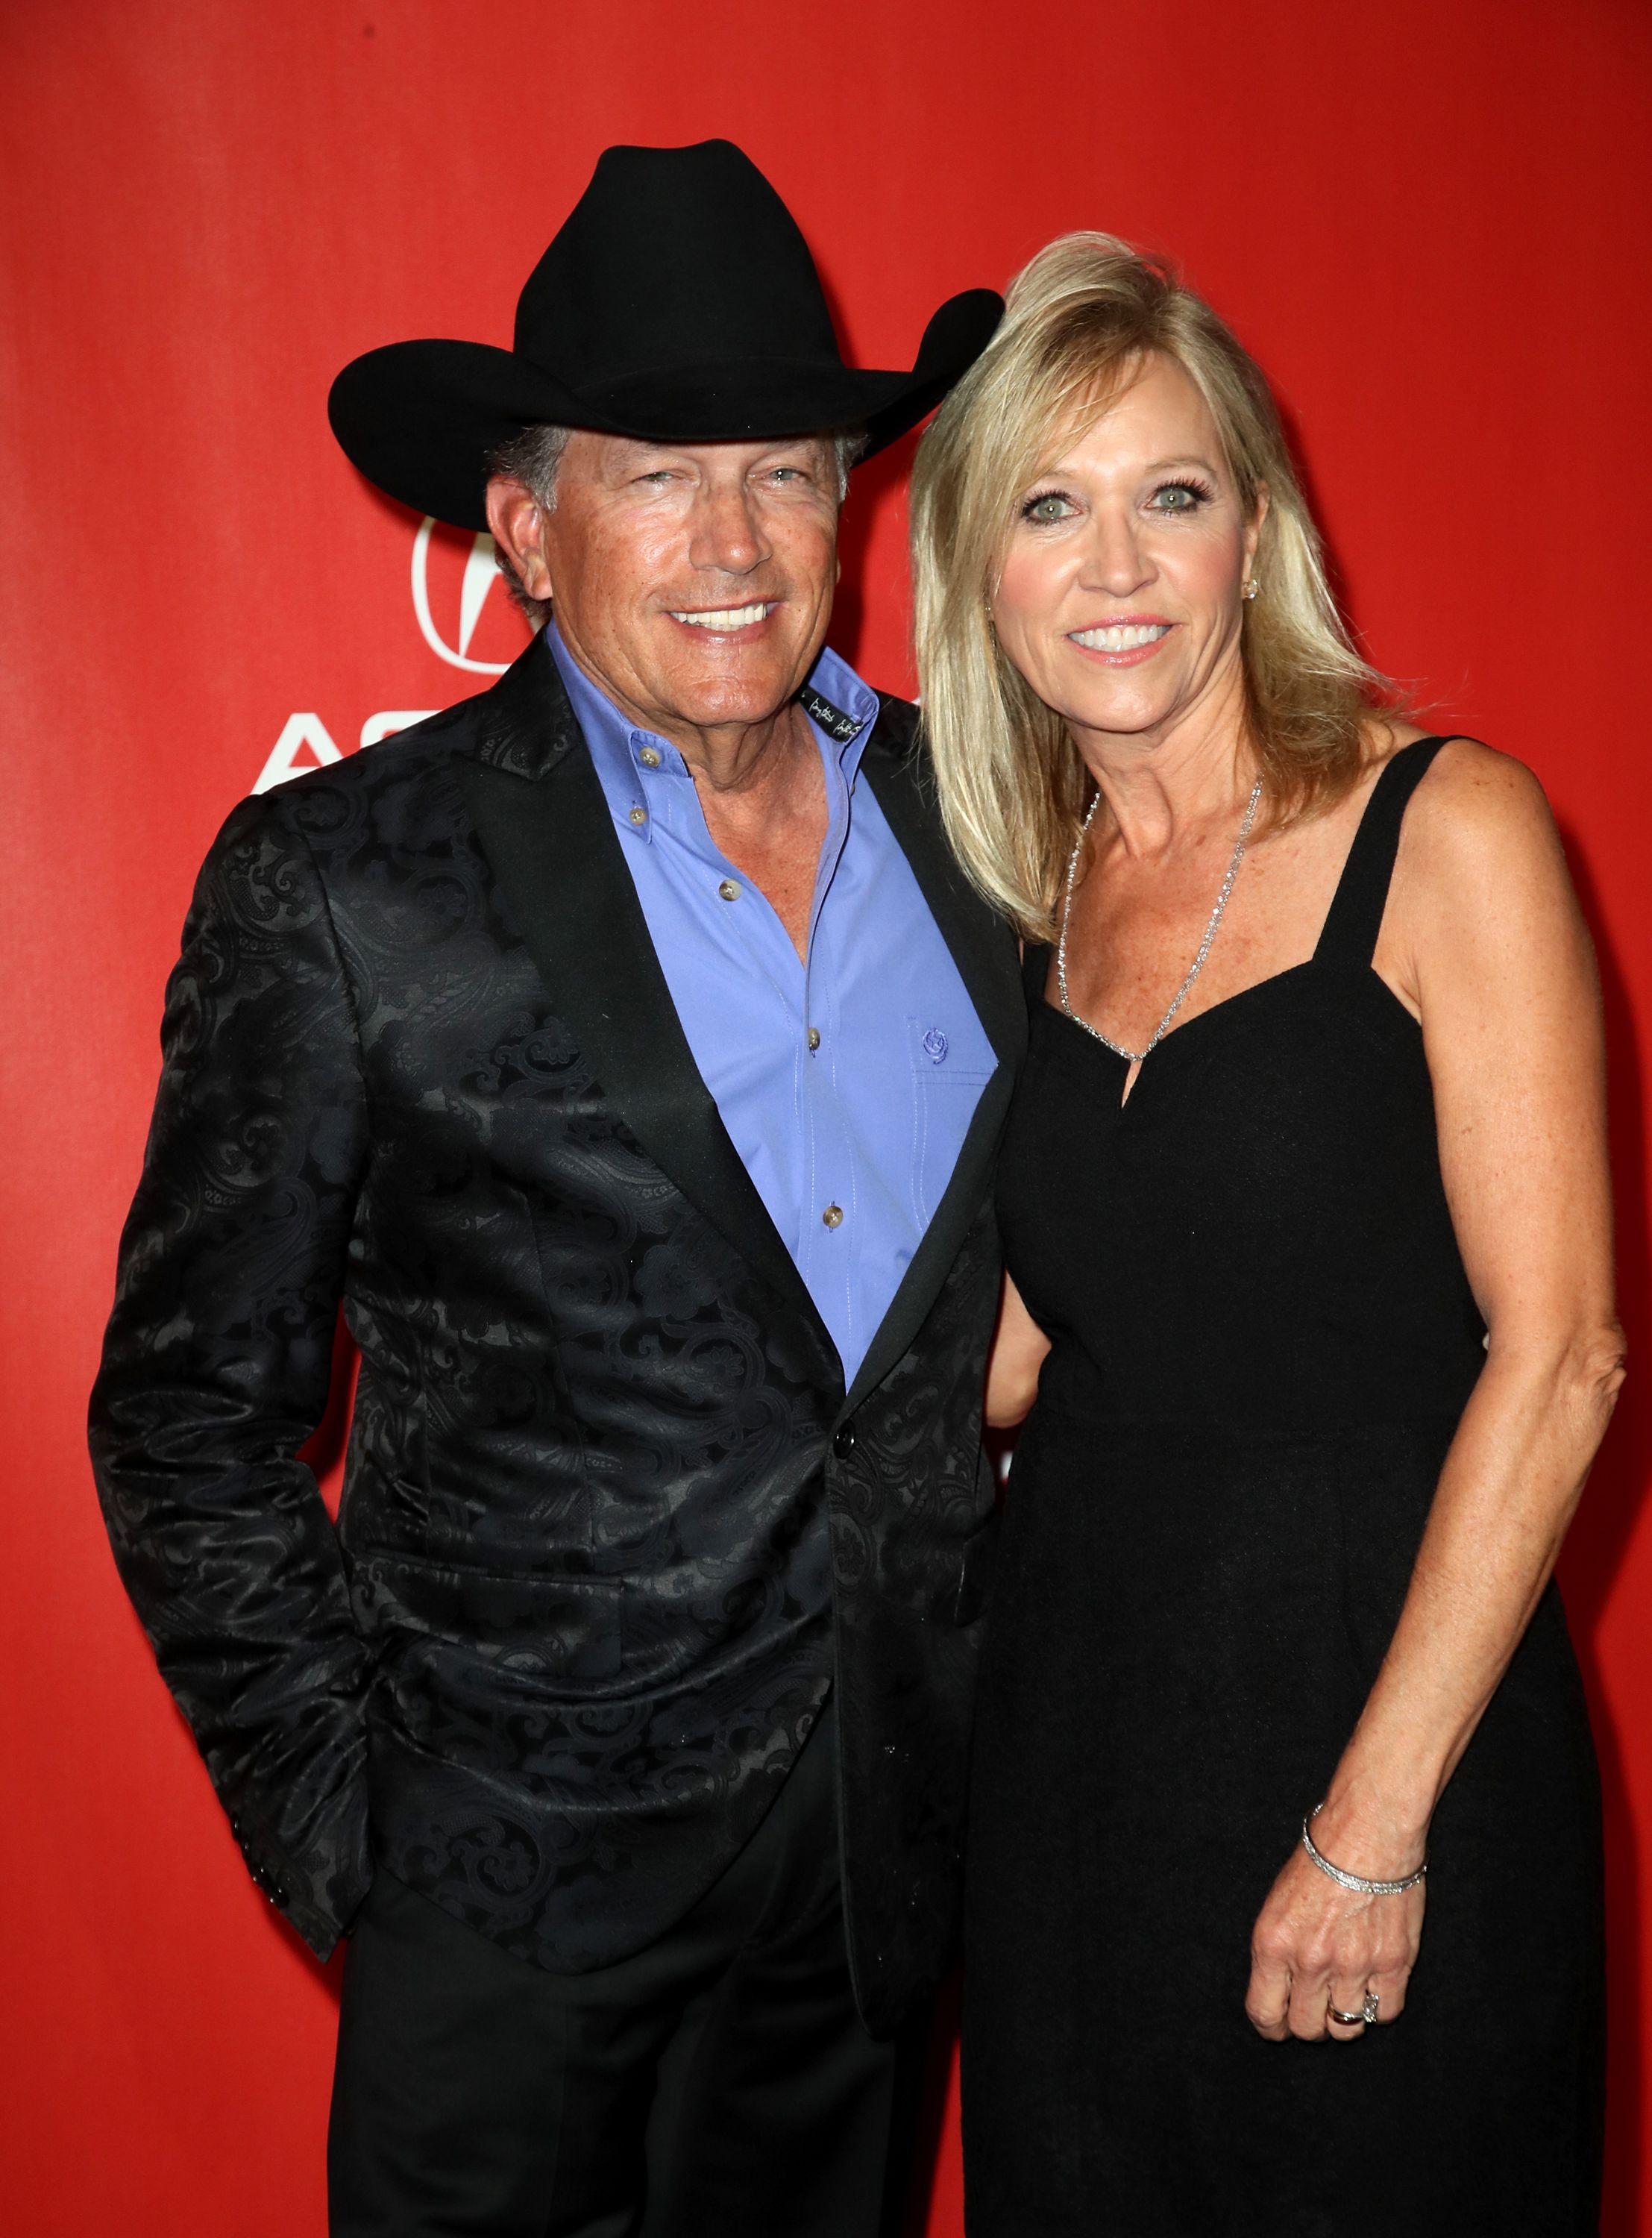 George Strait and Norma Strait during the 2017 MusiCares Person of the Year honoring Tom Petty on February 10, 2017 in Los Angeles, California. | Source: Getty Images